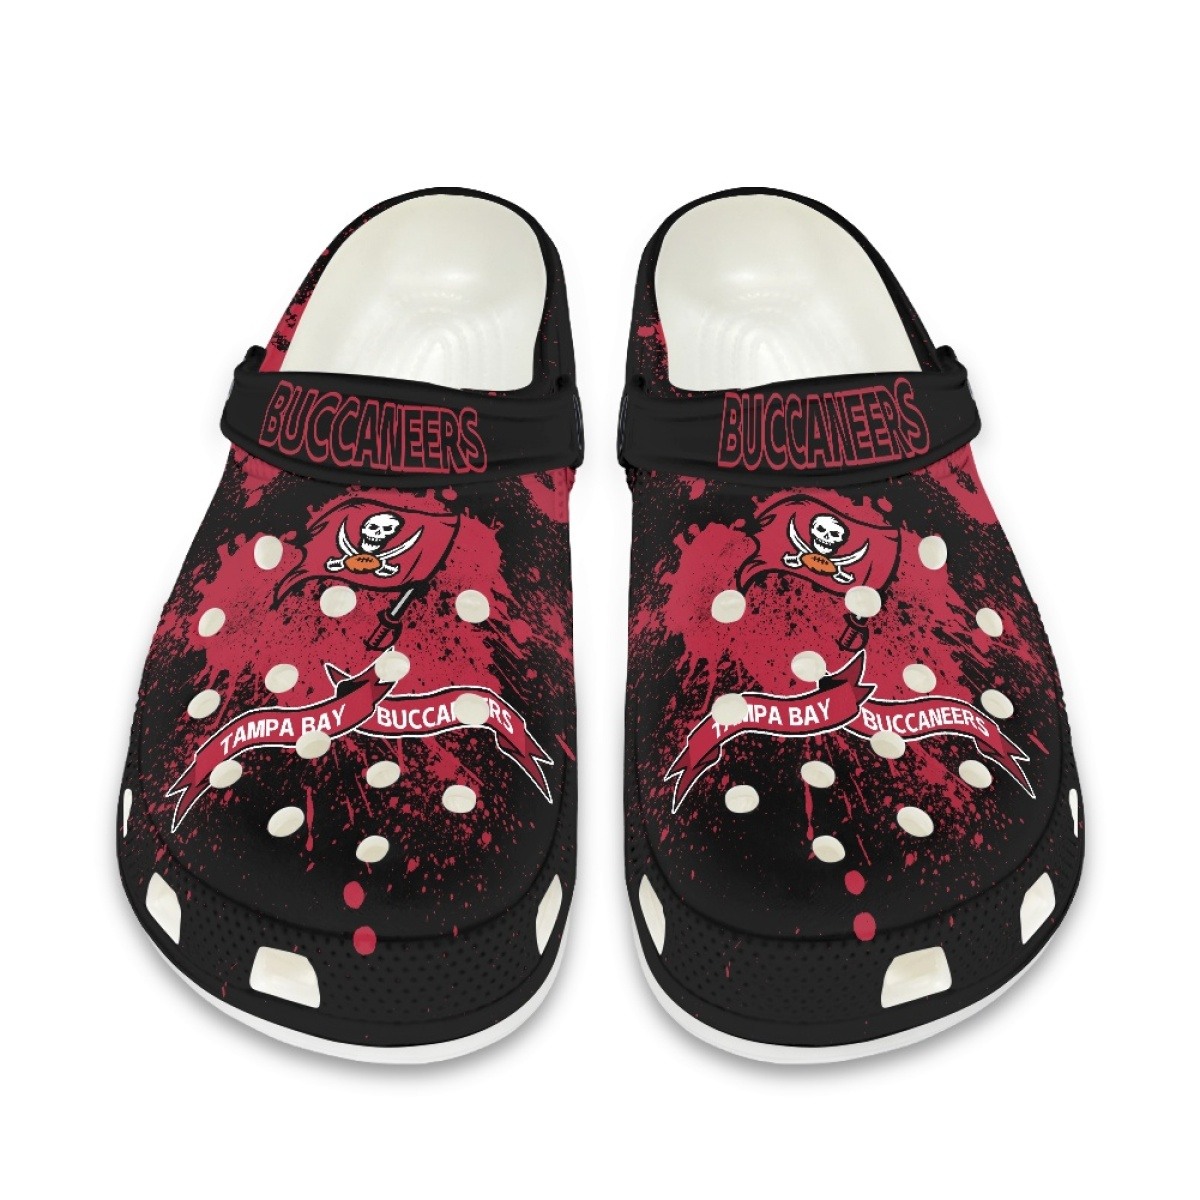 Tampa Bay Buccaneers Shoes Cute Style#3 Crocs Shoes For Fans